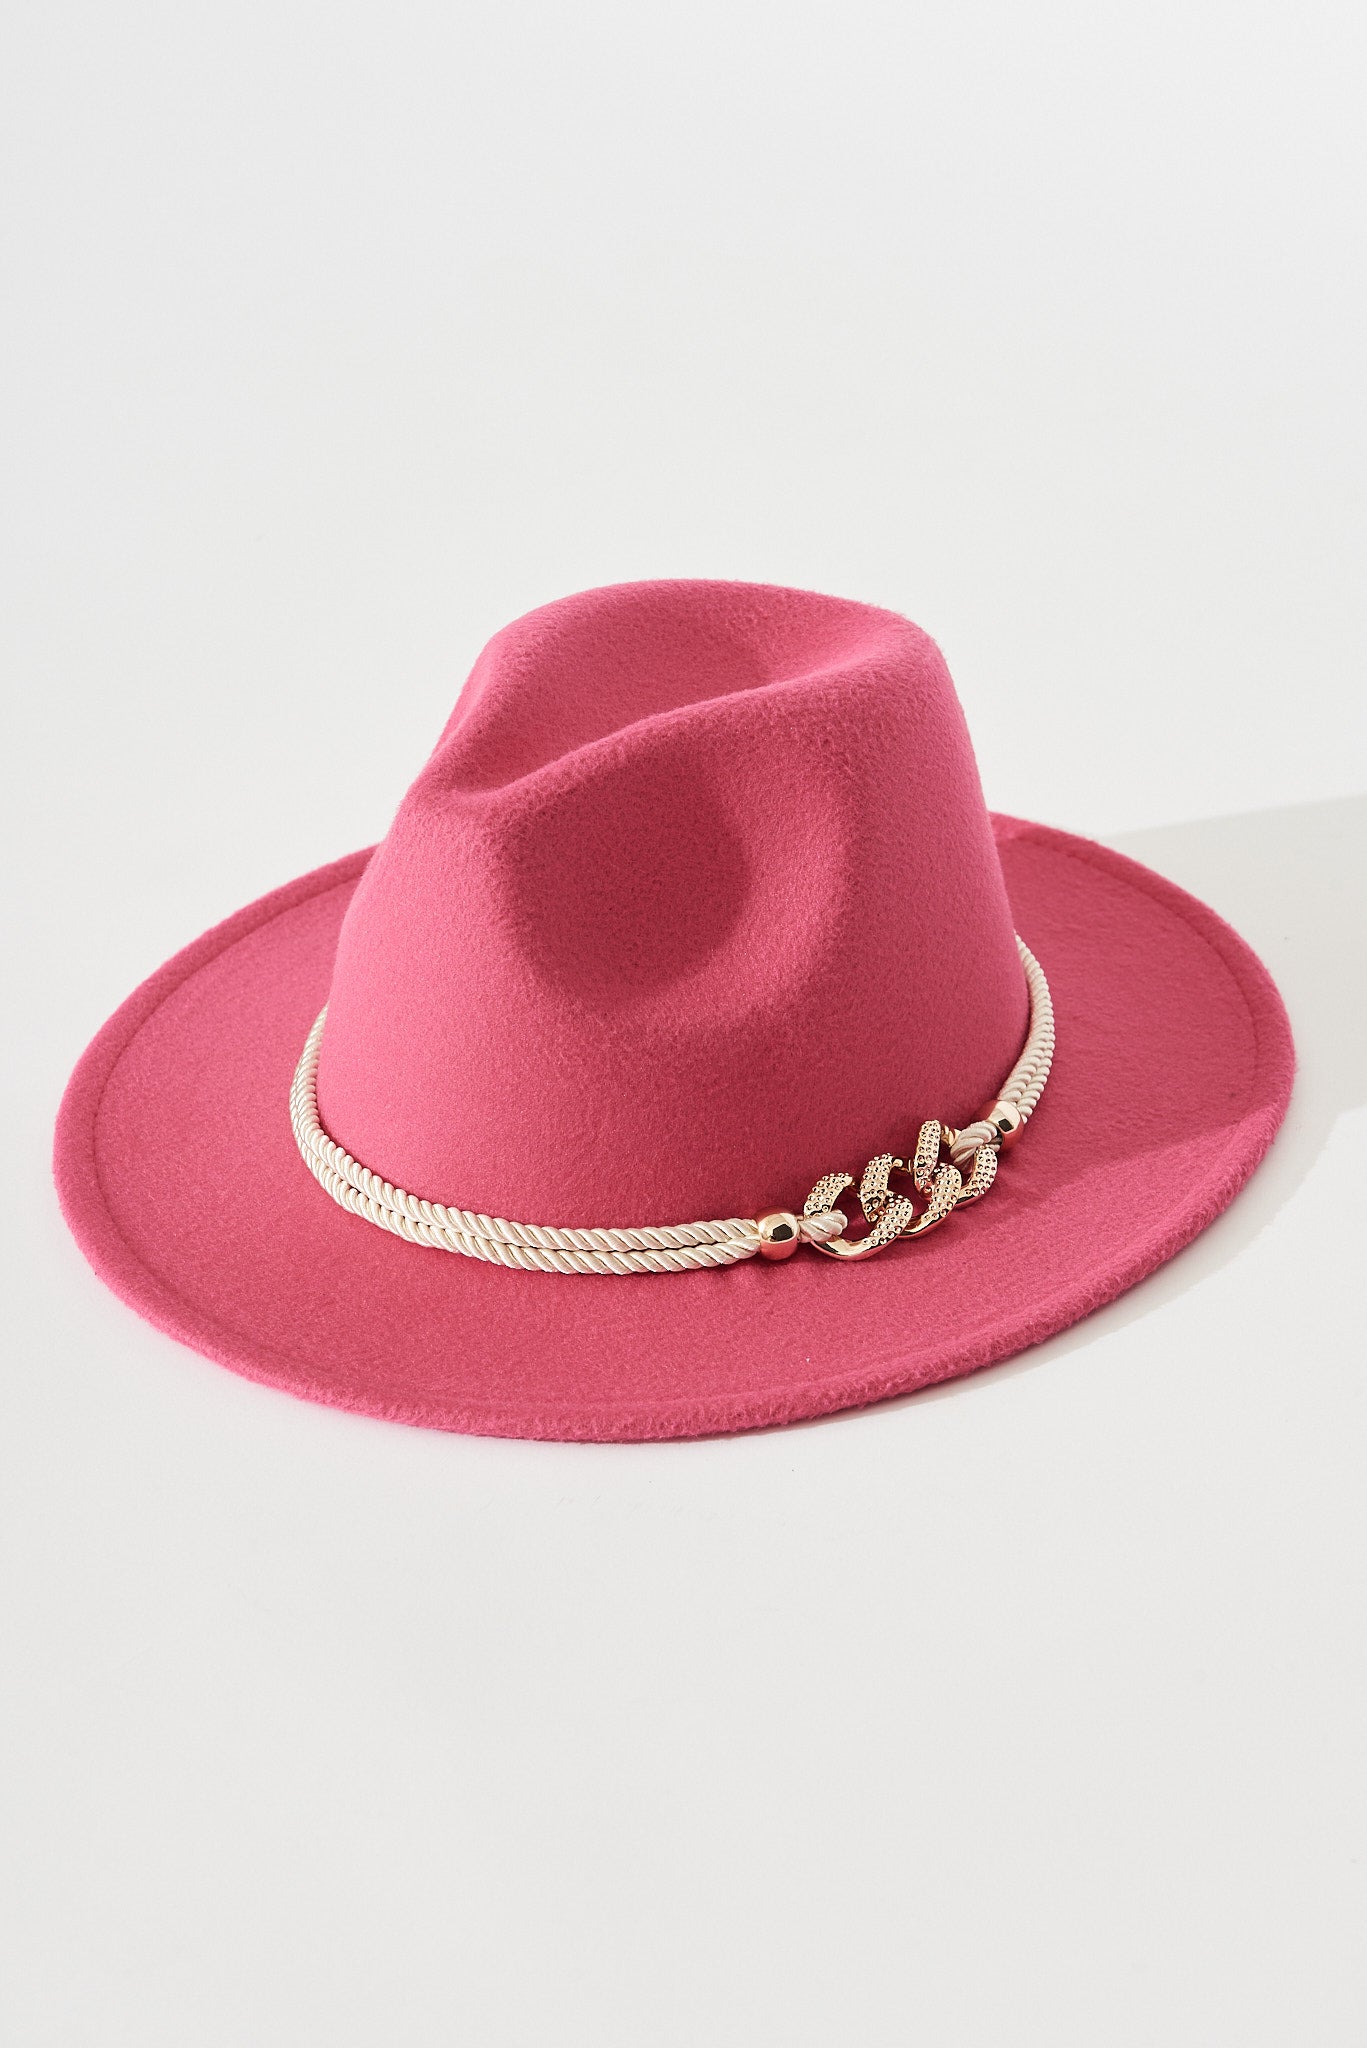 August + Delilah Montpellier Fedora In Hot Pink With Gold Trim - flatlay